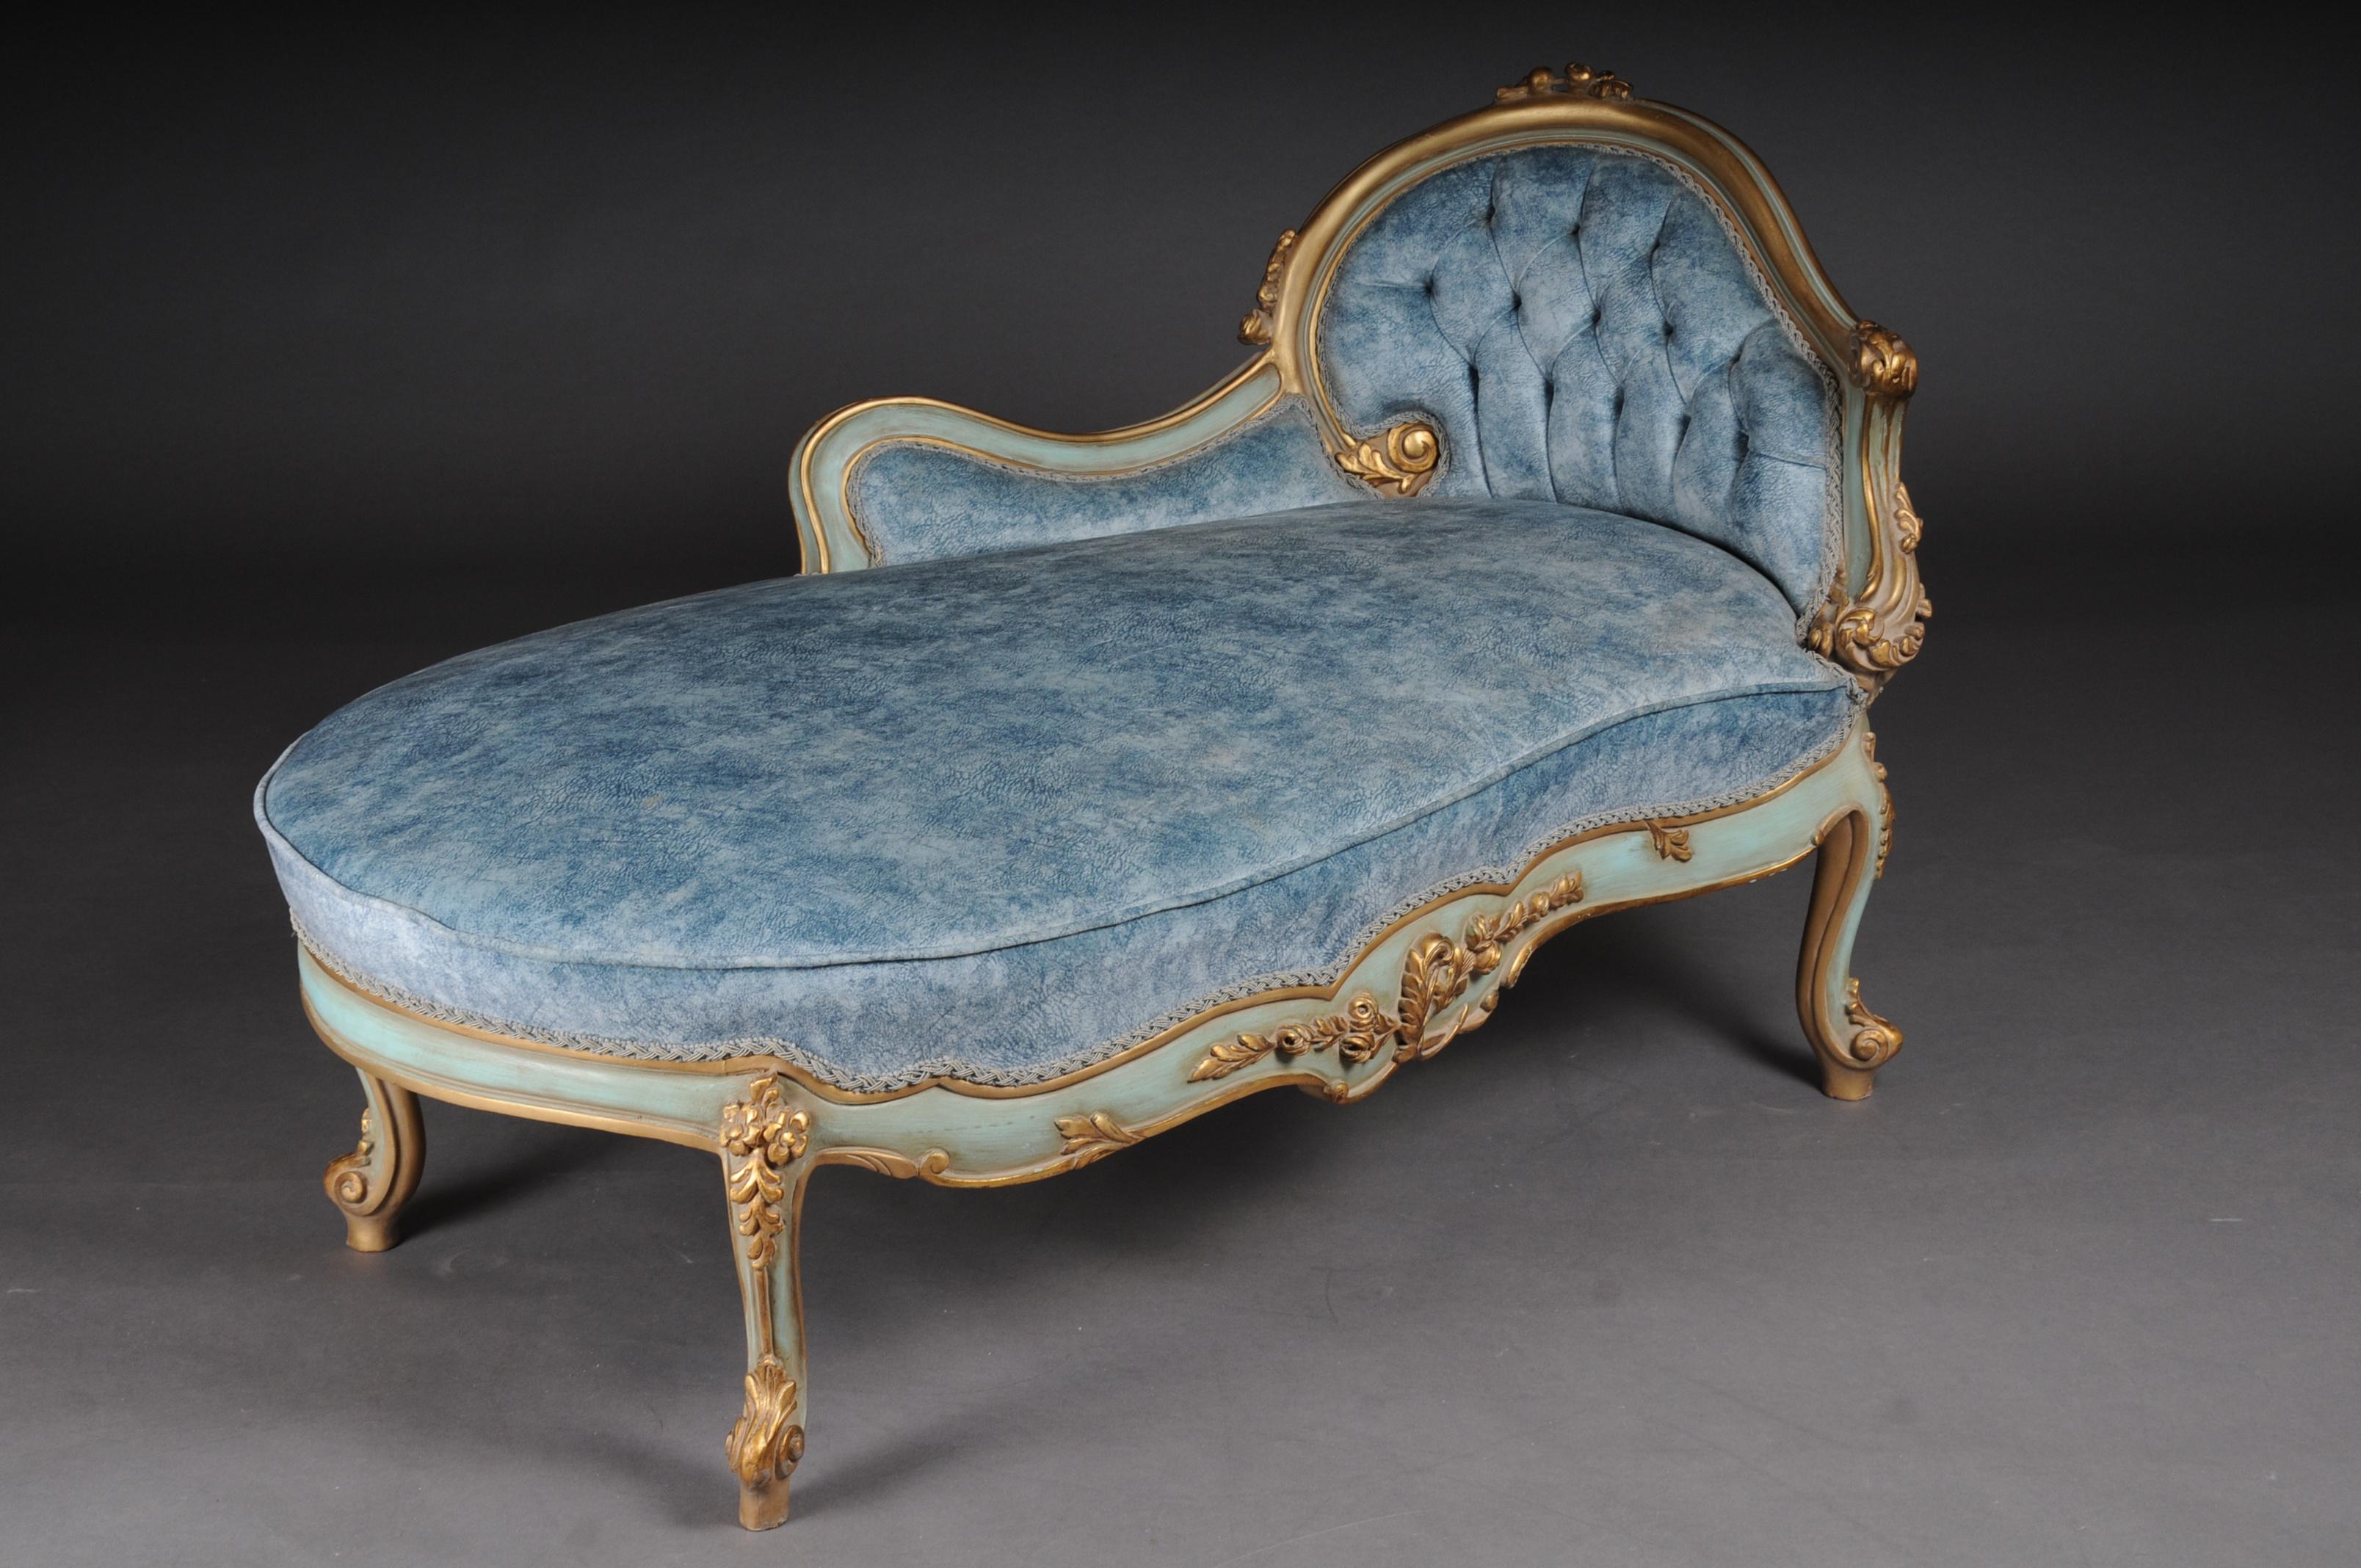 Unique lounger, chaise longue, Recamiere in Louis XV style

Solid beech wood, carved and gilded. Rising backrest edging with rocaille crowning. Matching curved frame with richly carved foliage. Slightly curved frame on curved legs. The seat and